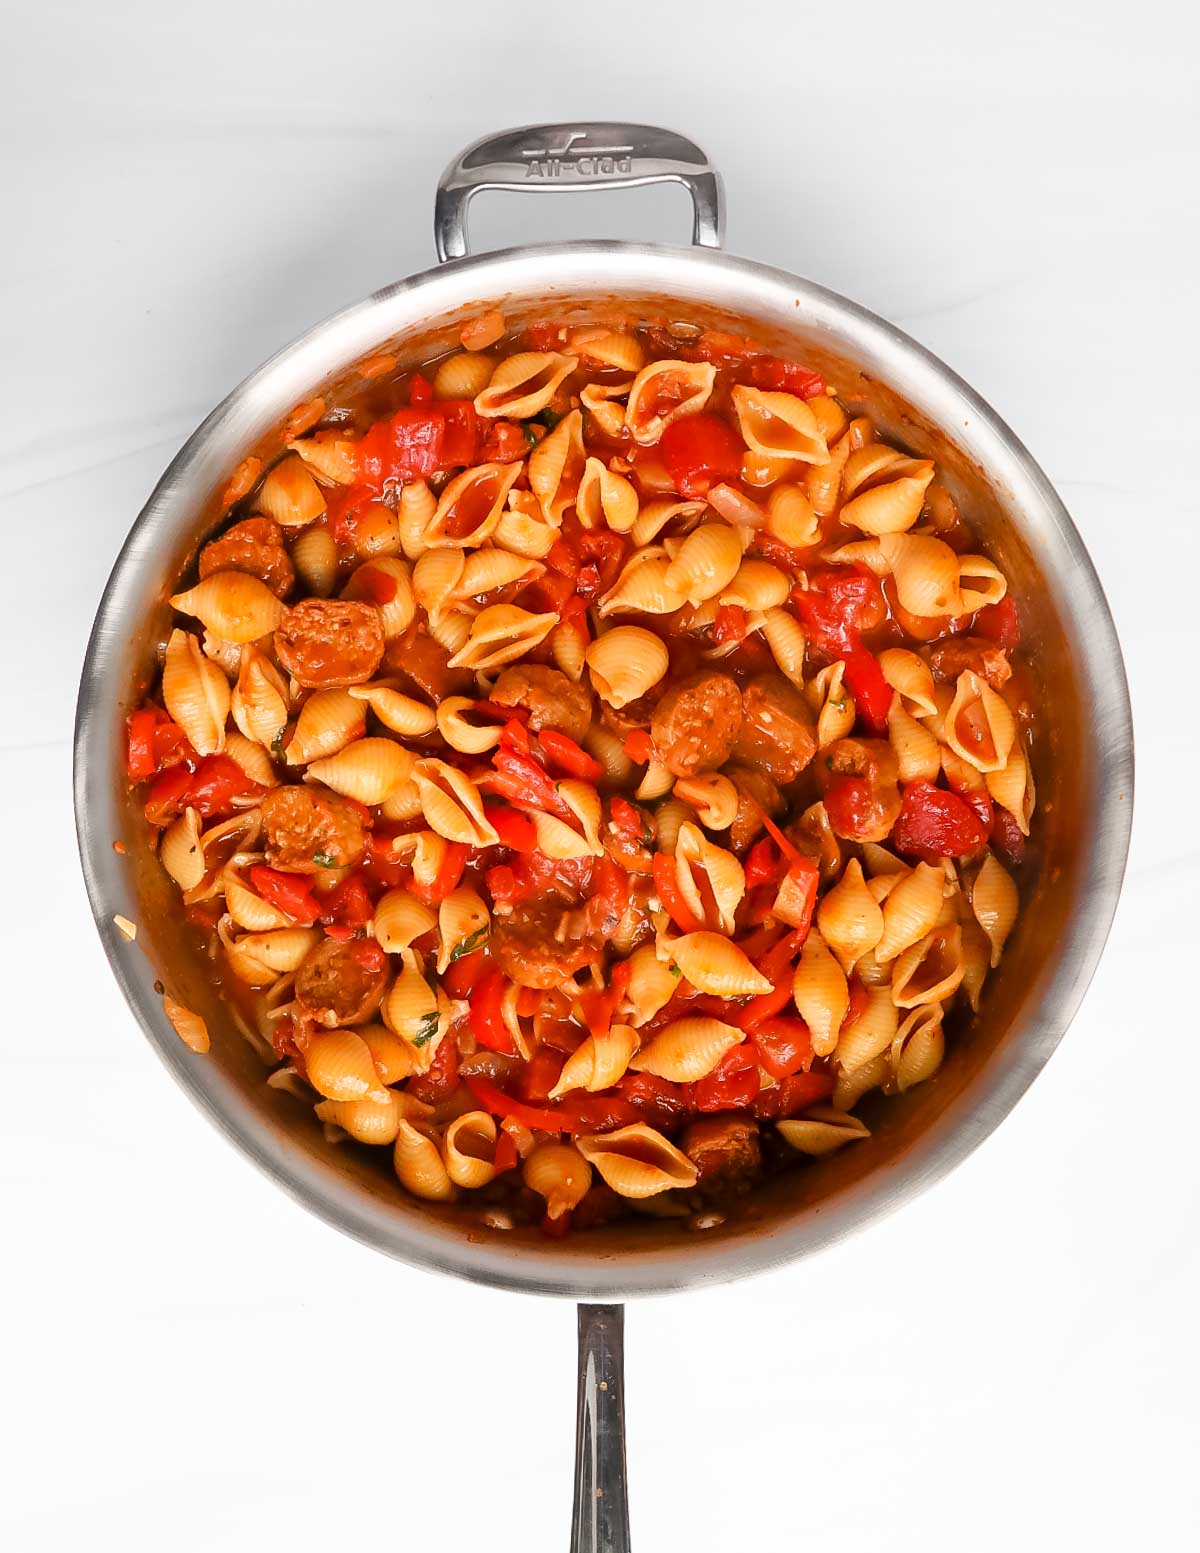 An overhead image of pasta in a large silver pan with sausages, tomatoes, peppers, and sauce.